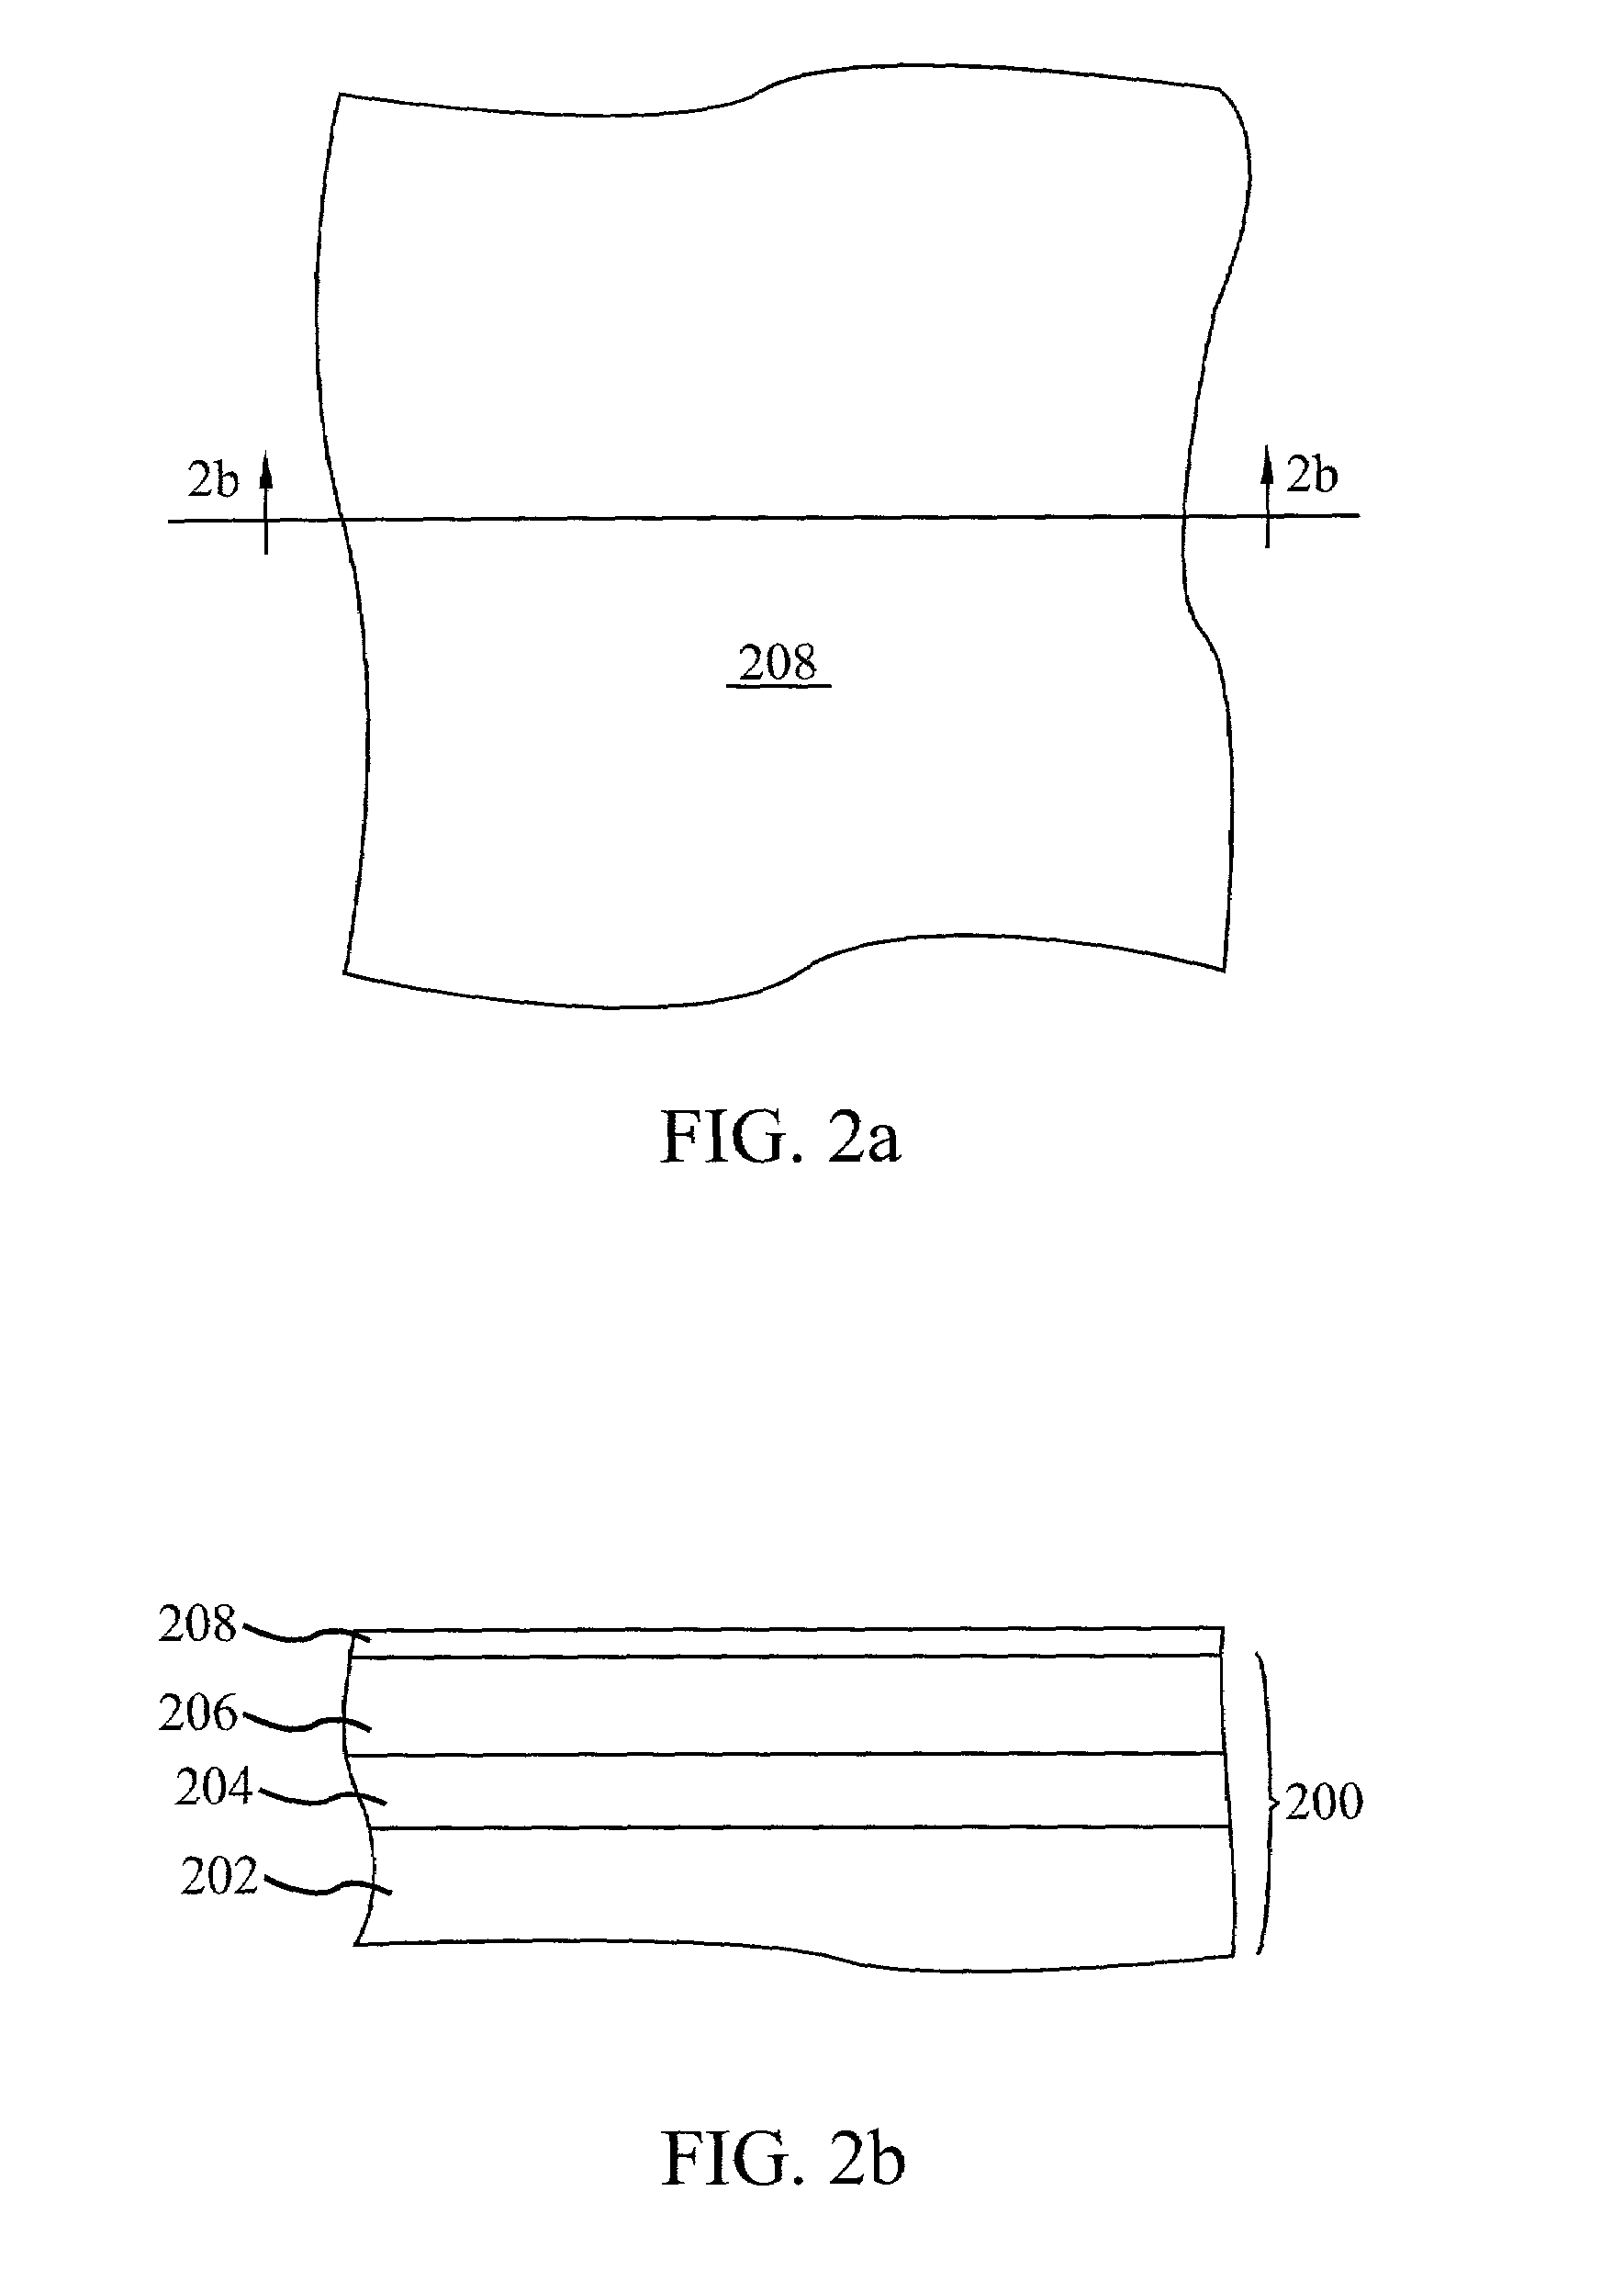 Finfet SRAM cell using low mobility plane for cell stability and method for forming